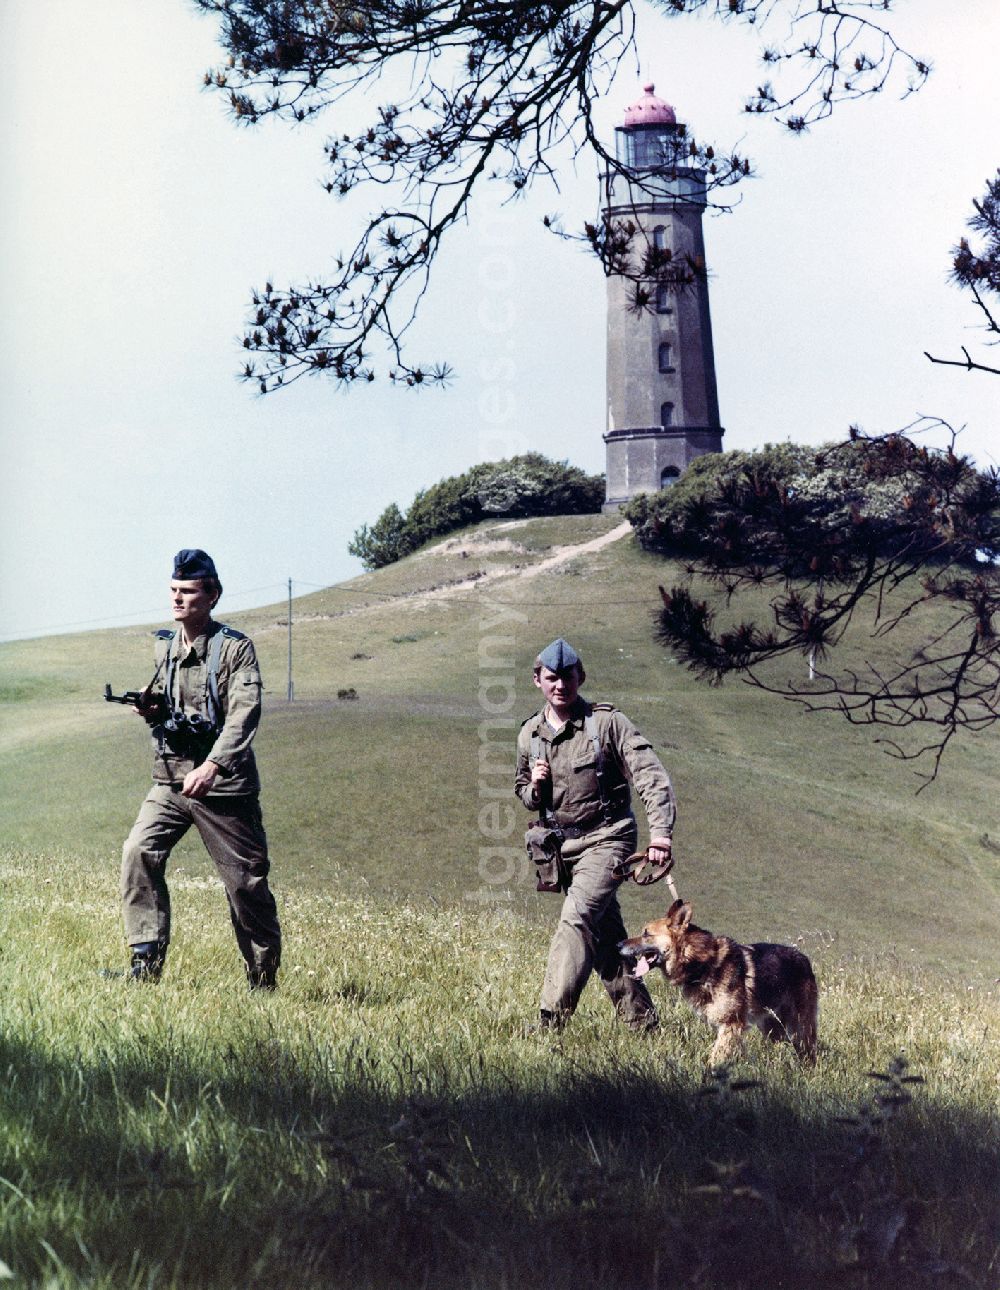 GDR image archive: Sassnitz - Landside border control of the Baltic Sea coast by members of the border brigade Coast of East German border guards with headlight truck